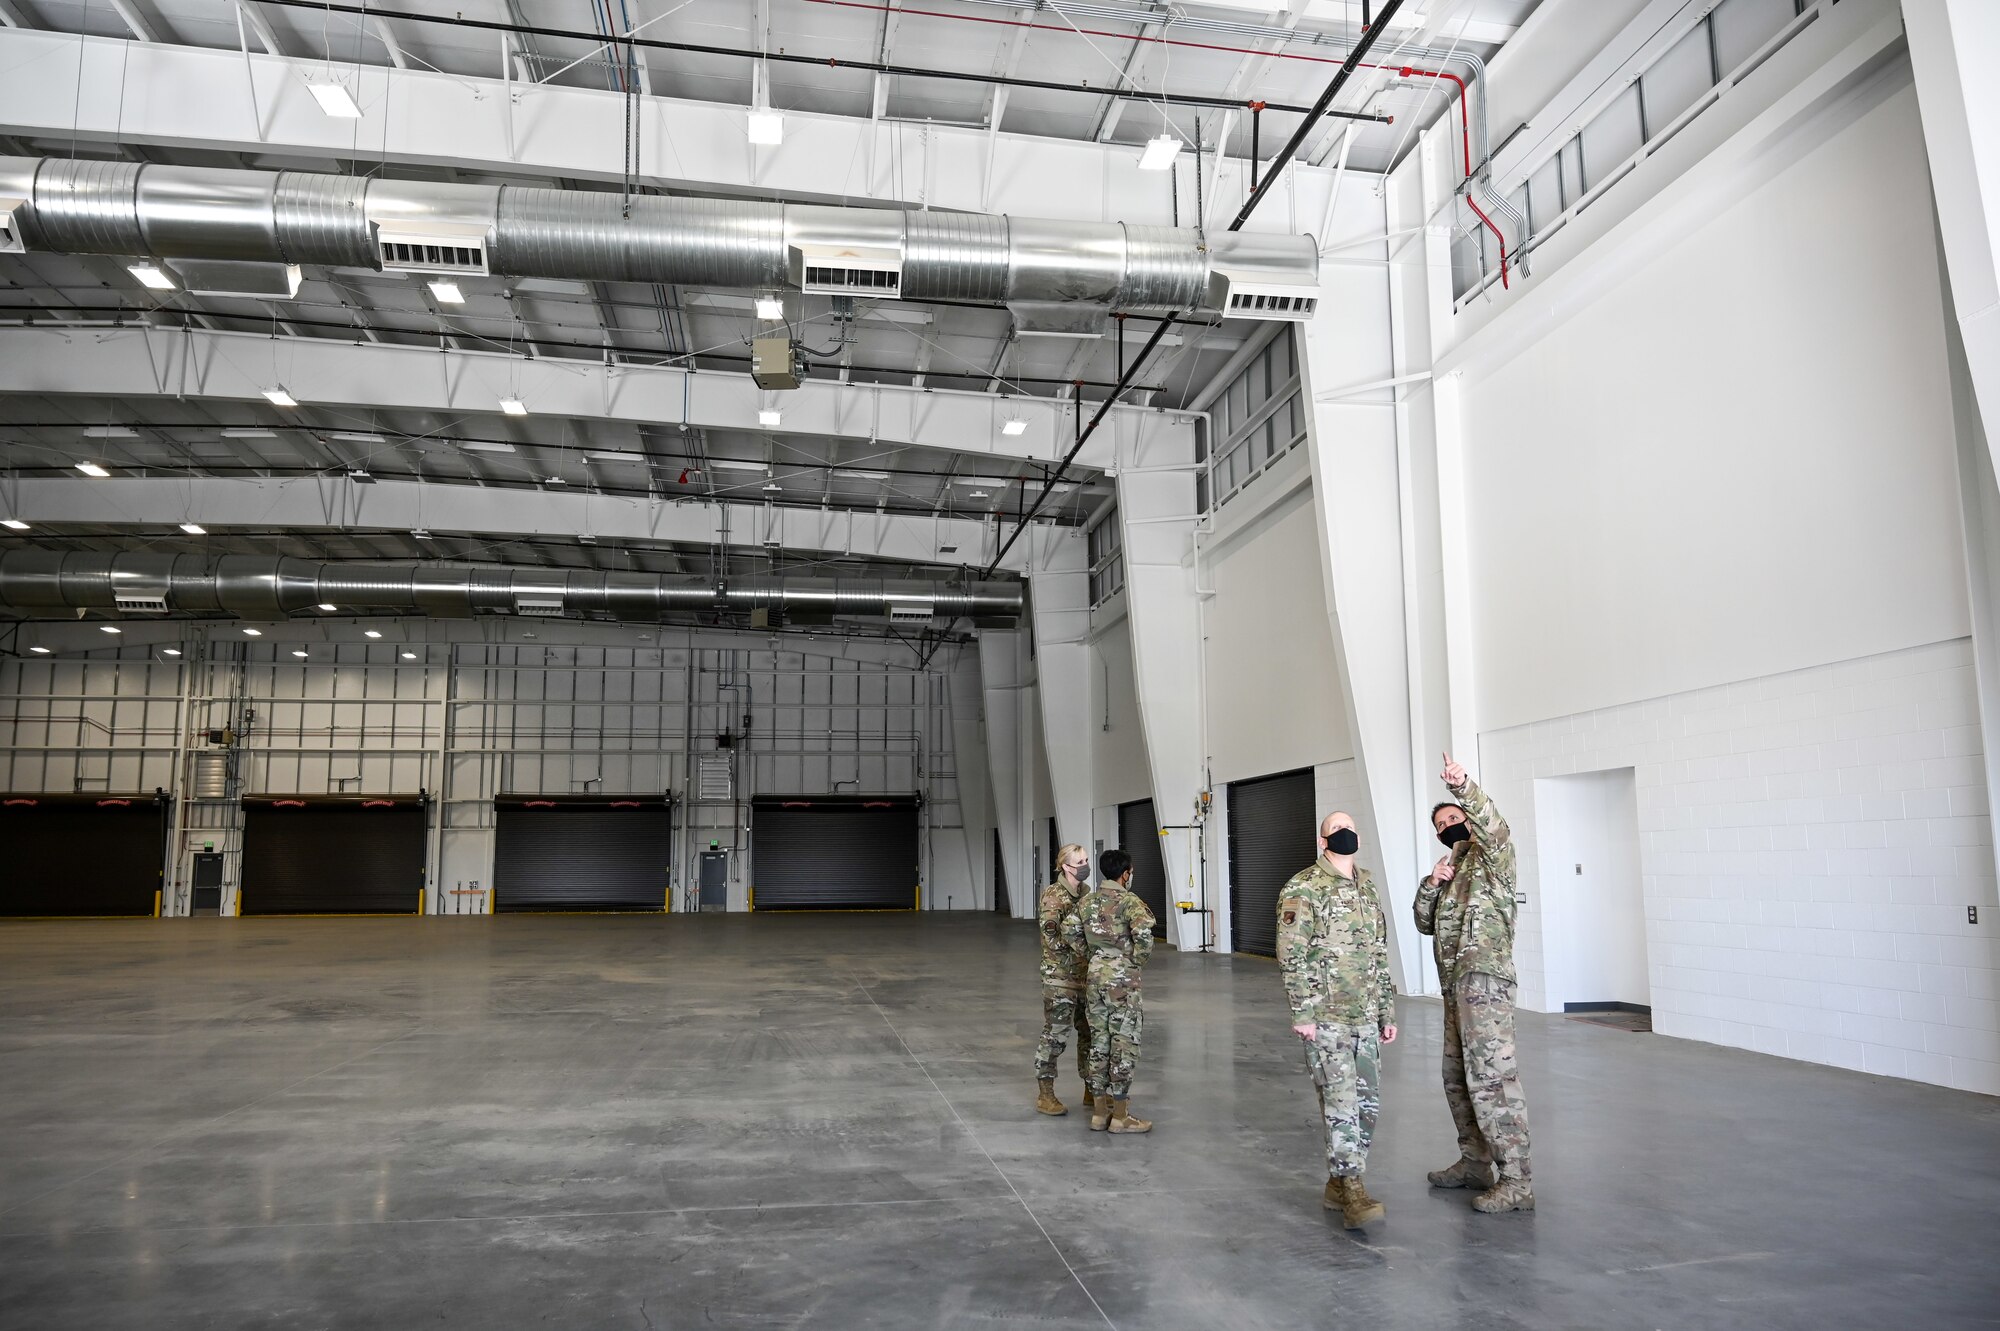 Senior Master Sgt. Dayton Wenzel, 649th Munitions Squadron, walks Chief Master Sgt. Christopher Walker, 75th Air Base Wing command chief, around the new Standarized Air Munitions Package facility Oct. 22, 2020, at Hill Air Force Base, Utah. (U.S. Air Force photo by Cynthia Griggs)